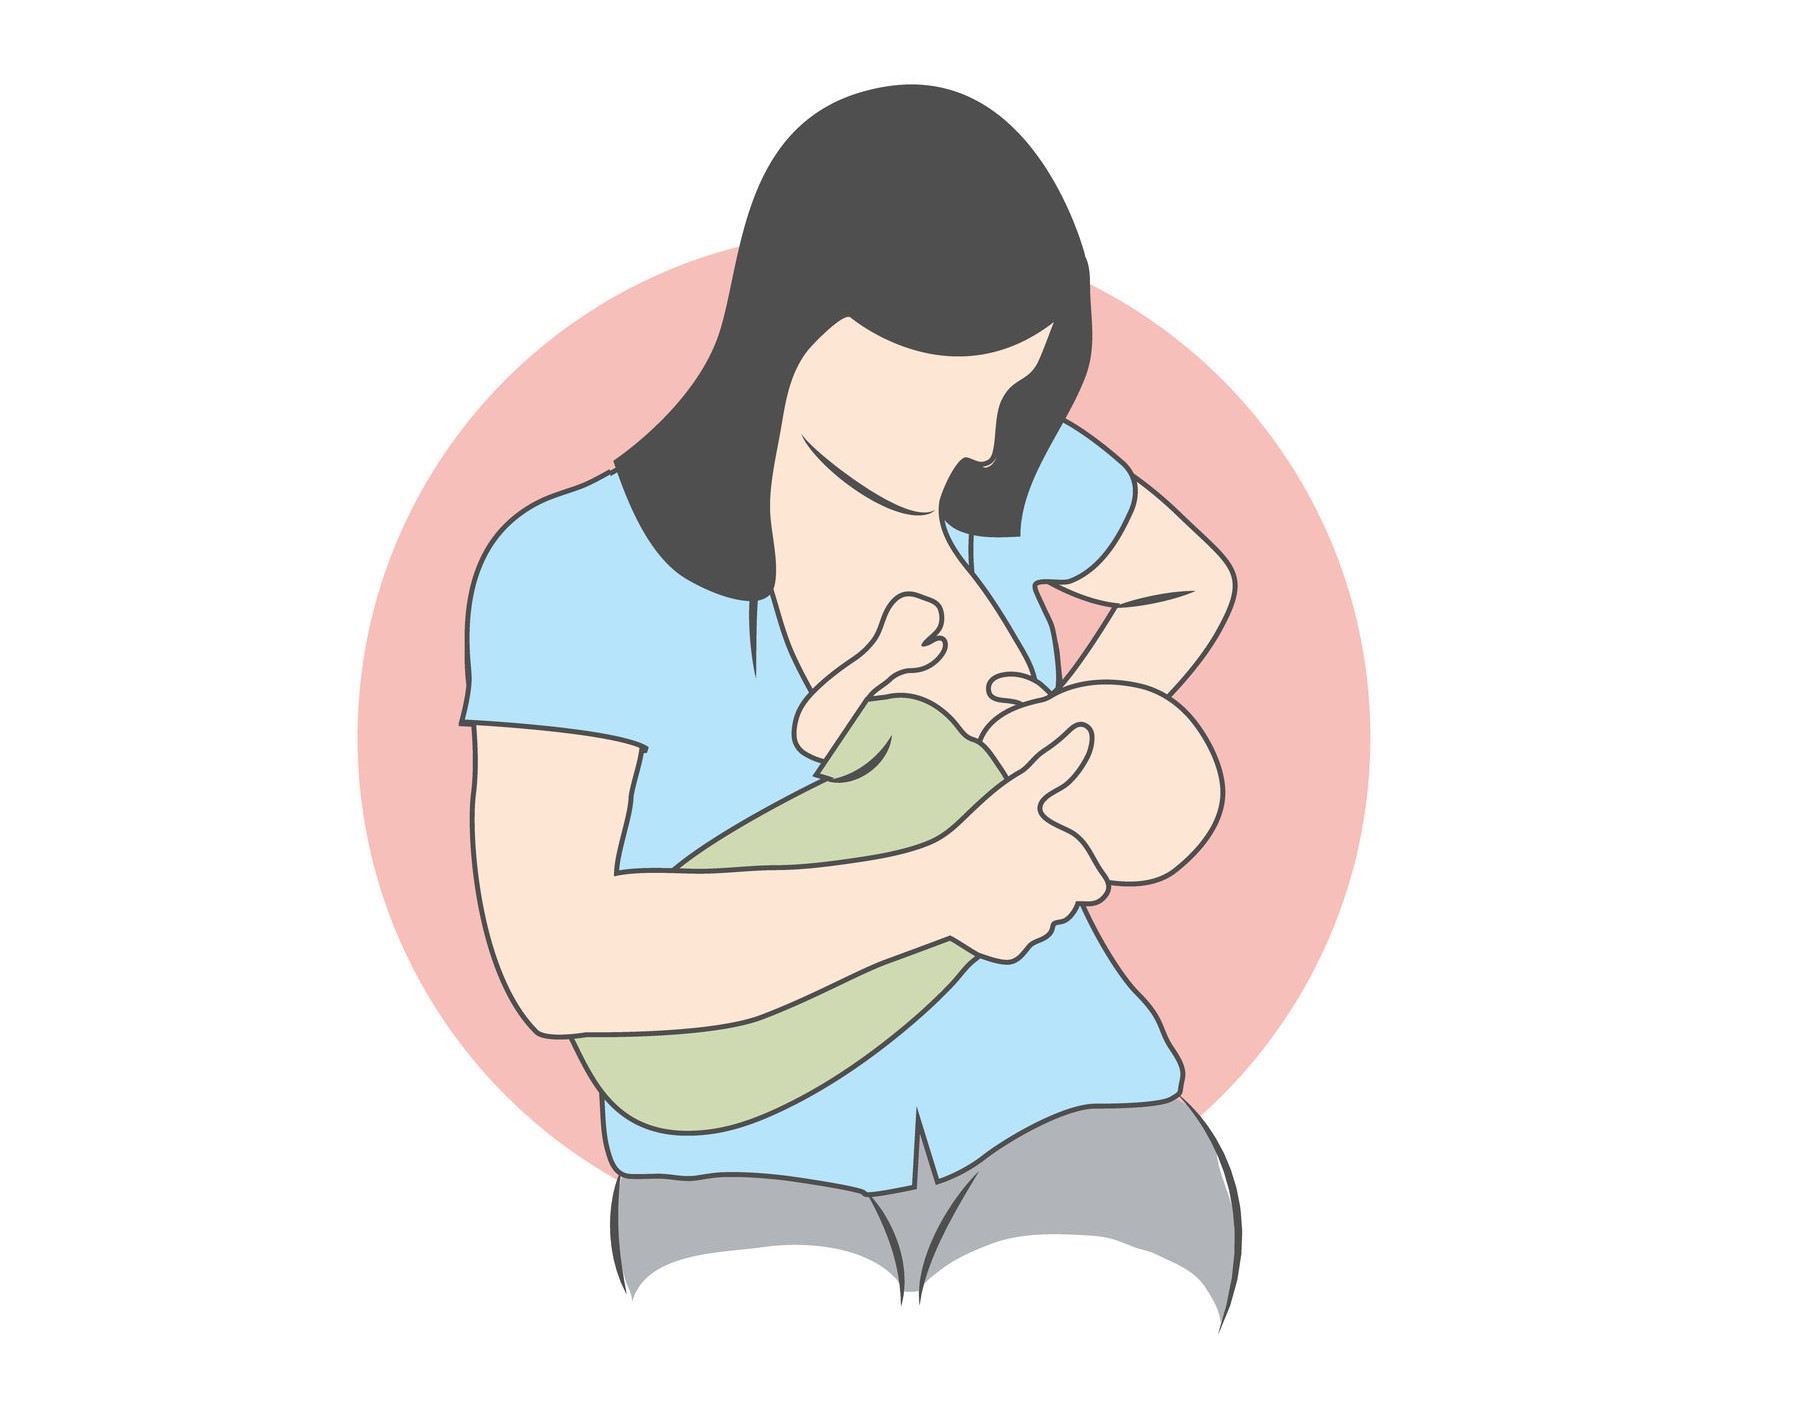 Illustrated image of a breastfeeding woman